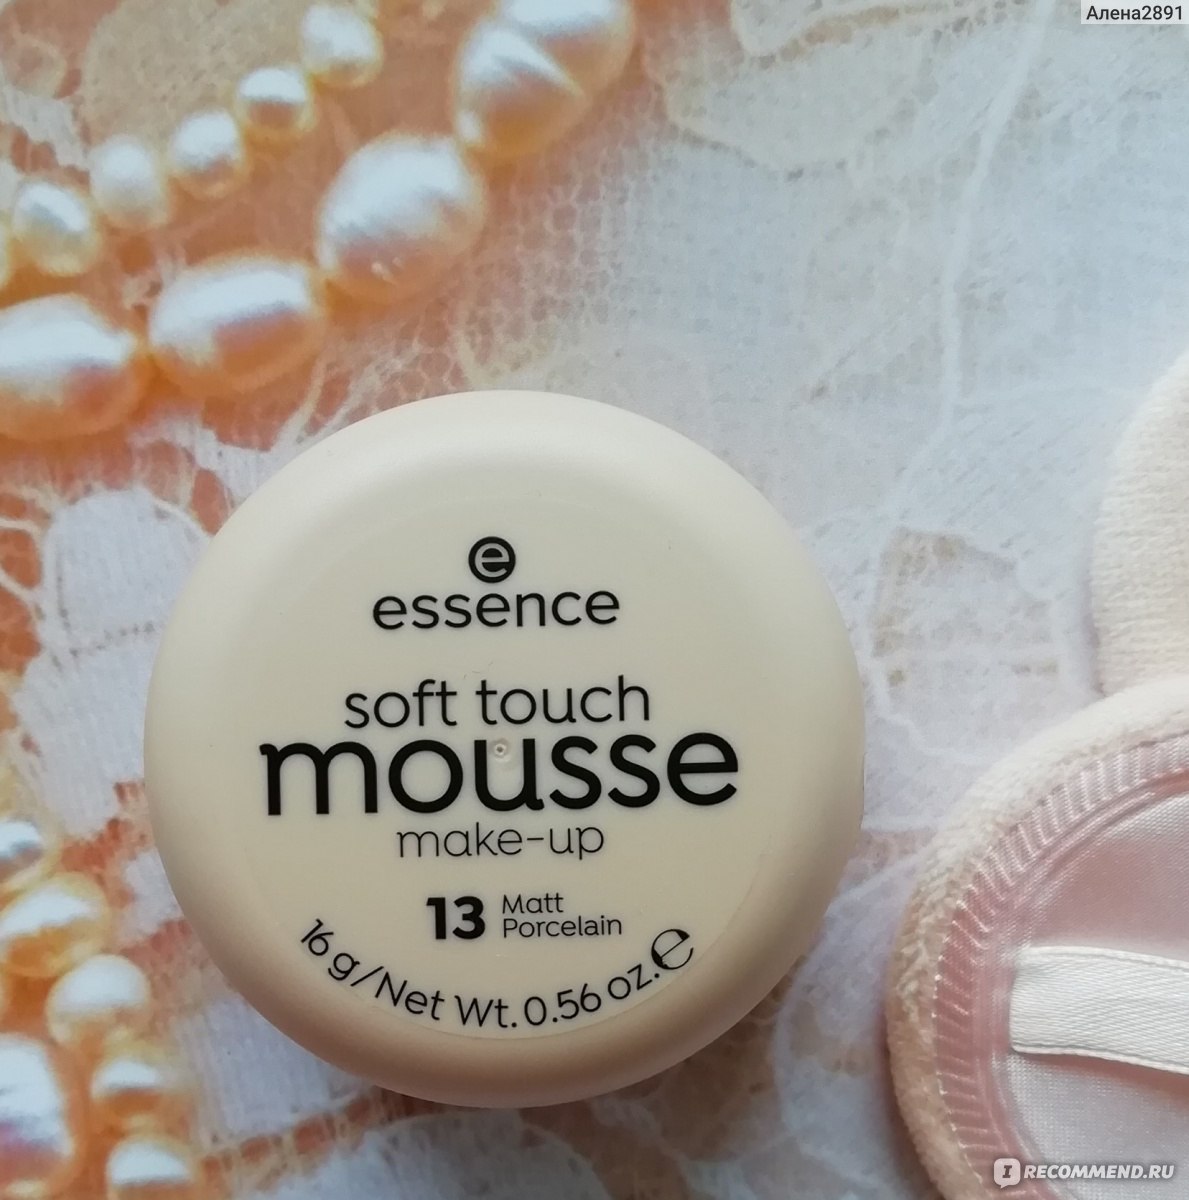 Эссенс для лица. Essence Soft Touch Mousse make-up. Мусс Essence Soft Touch. Essence Soft Touch Mousse make-up 13. Essence Mousse Soft Touch оттенки.